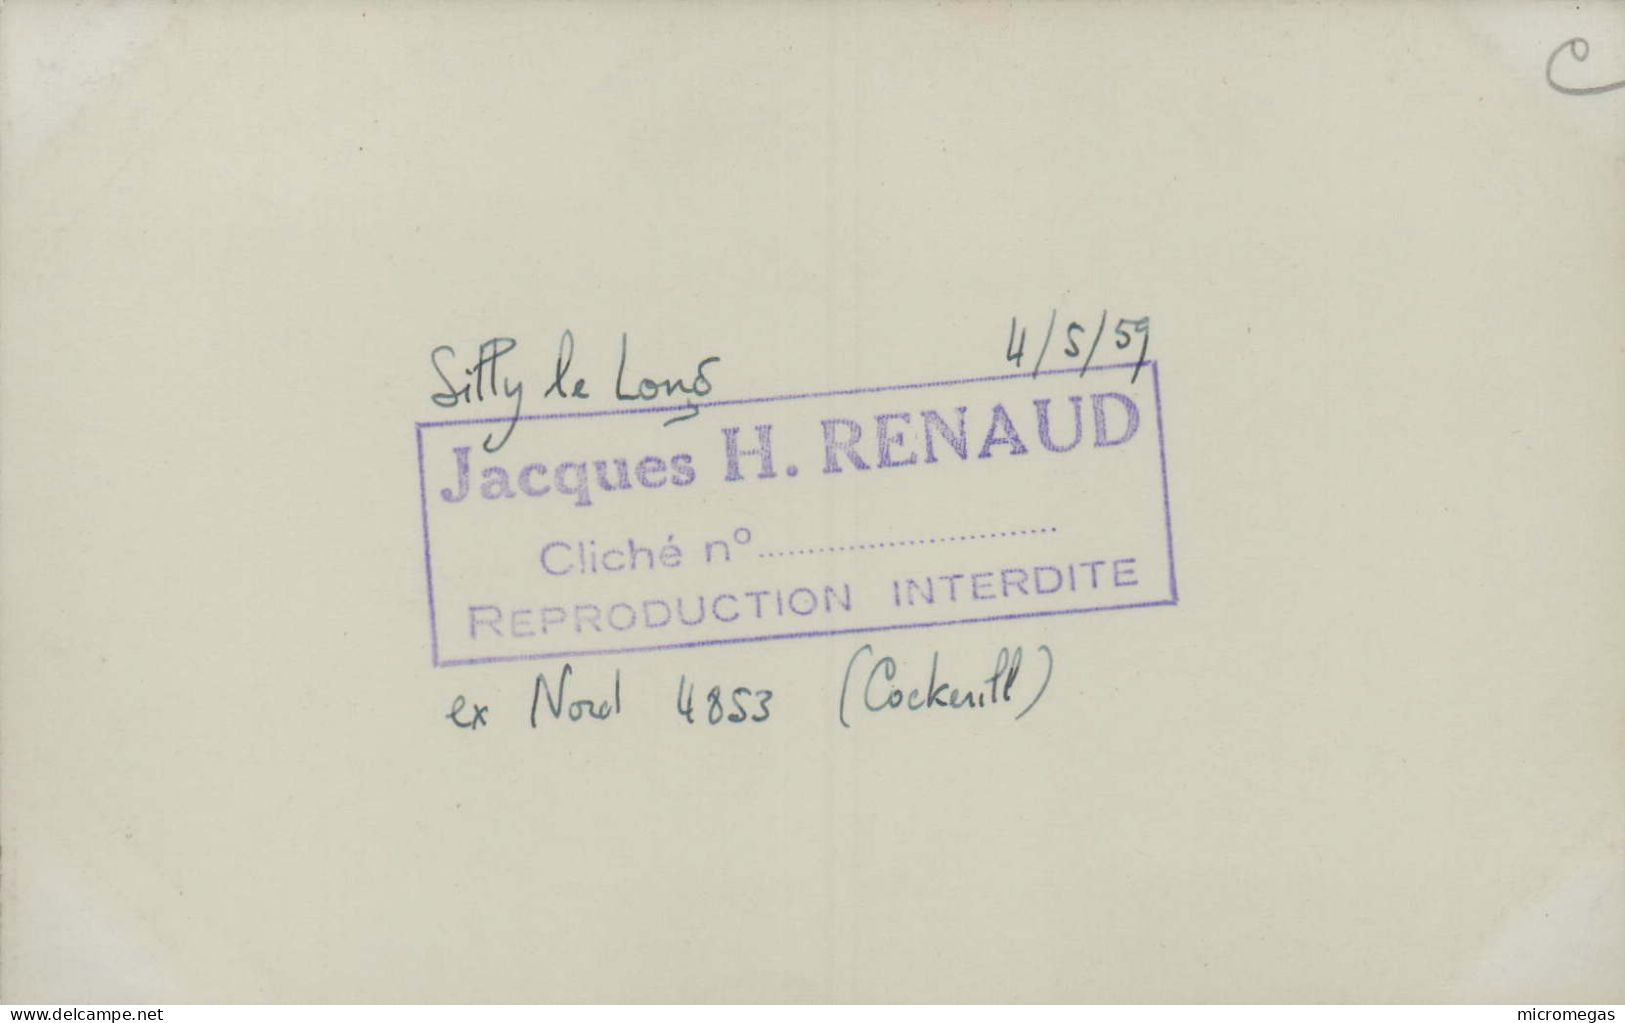 Silly-le-Long - Ex. Nord 4853 (Cockerill) - Cliché Jacques H. Renaud, 4-5-1959 - Trains